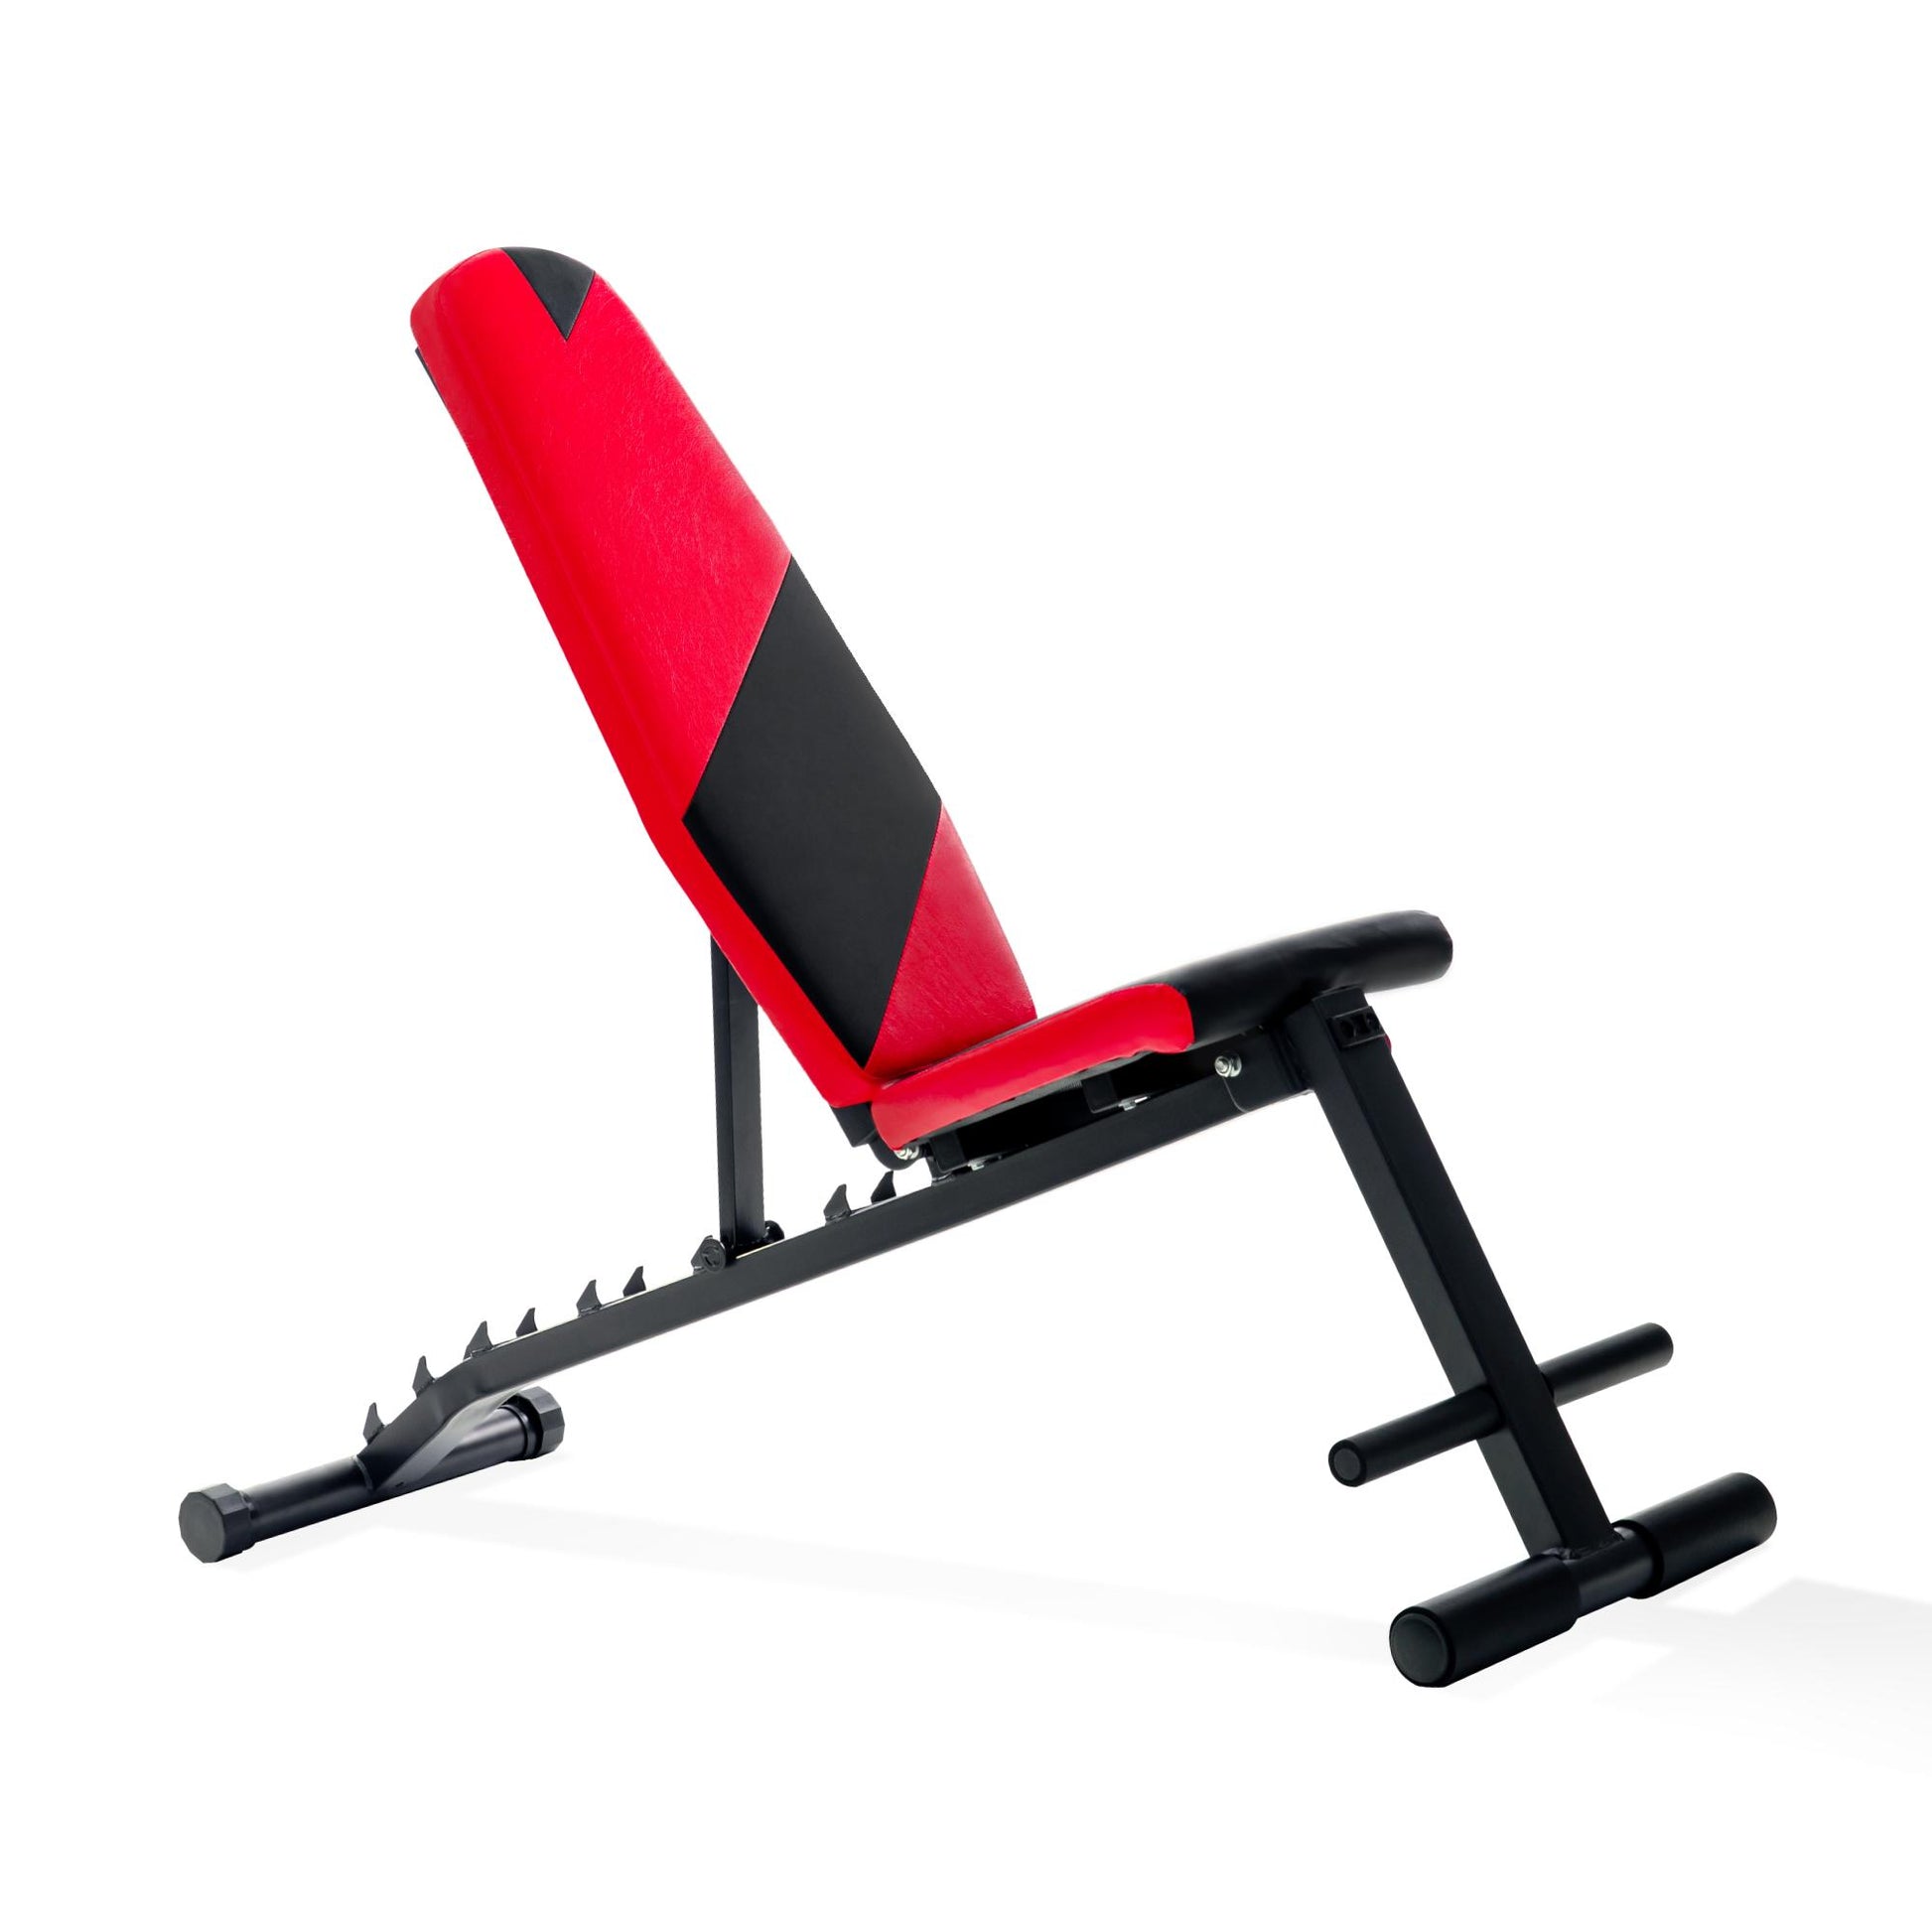 |Viavito Novalift Utility Weight Bench - angle updated|